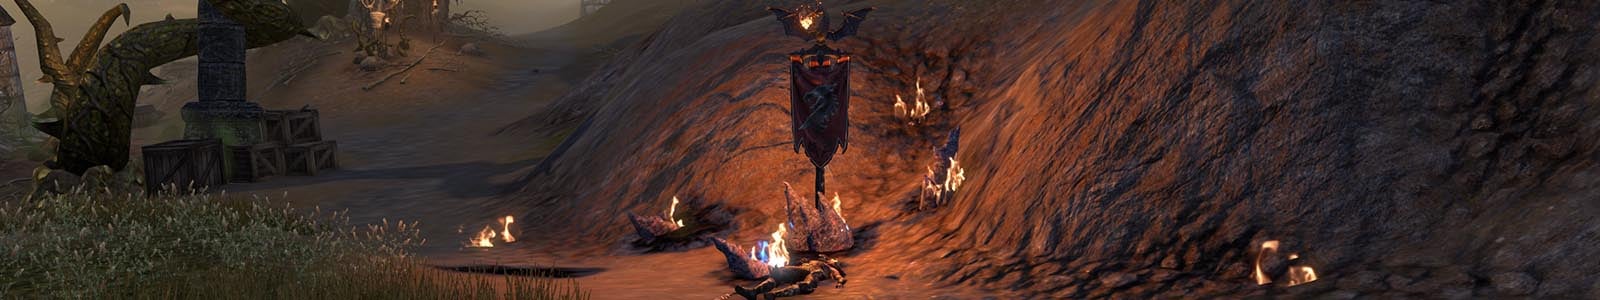 Empowering Chains Skill - ESO header